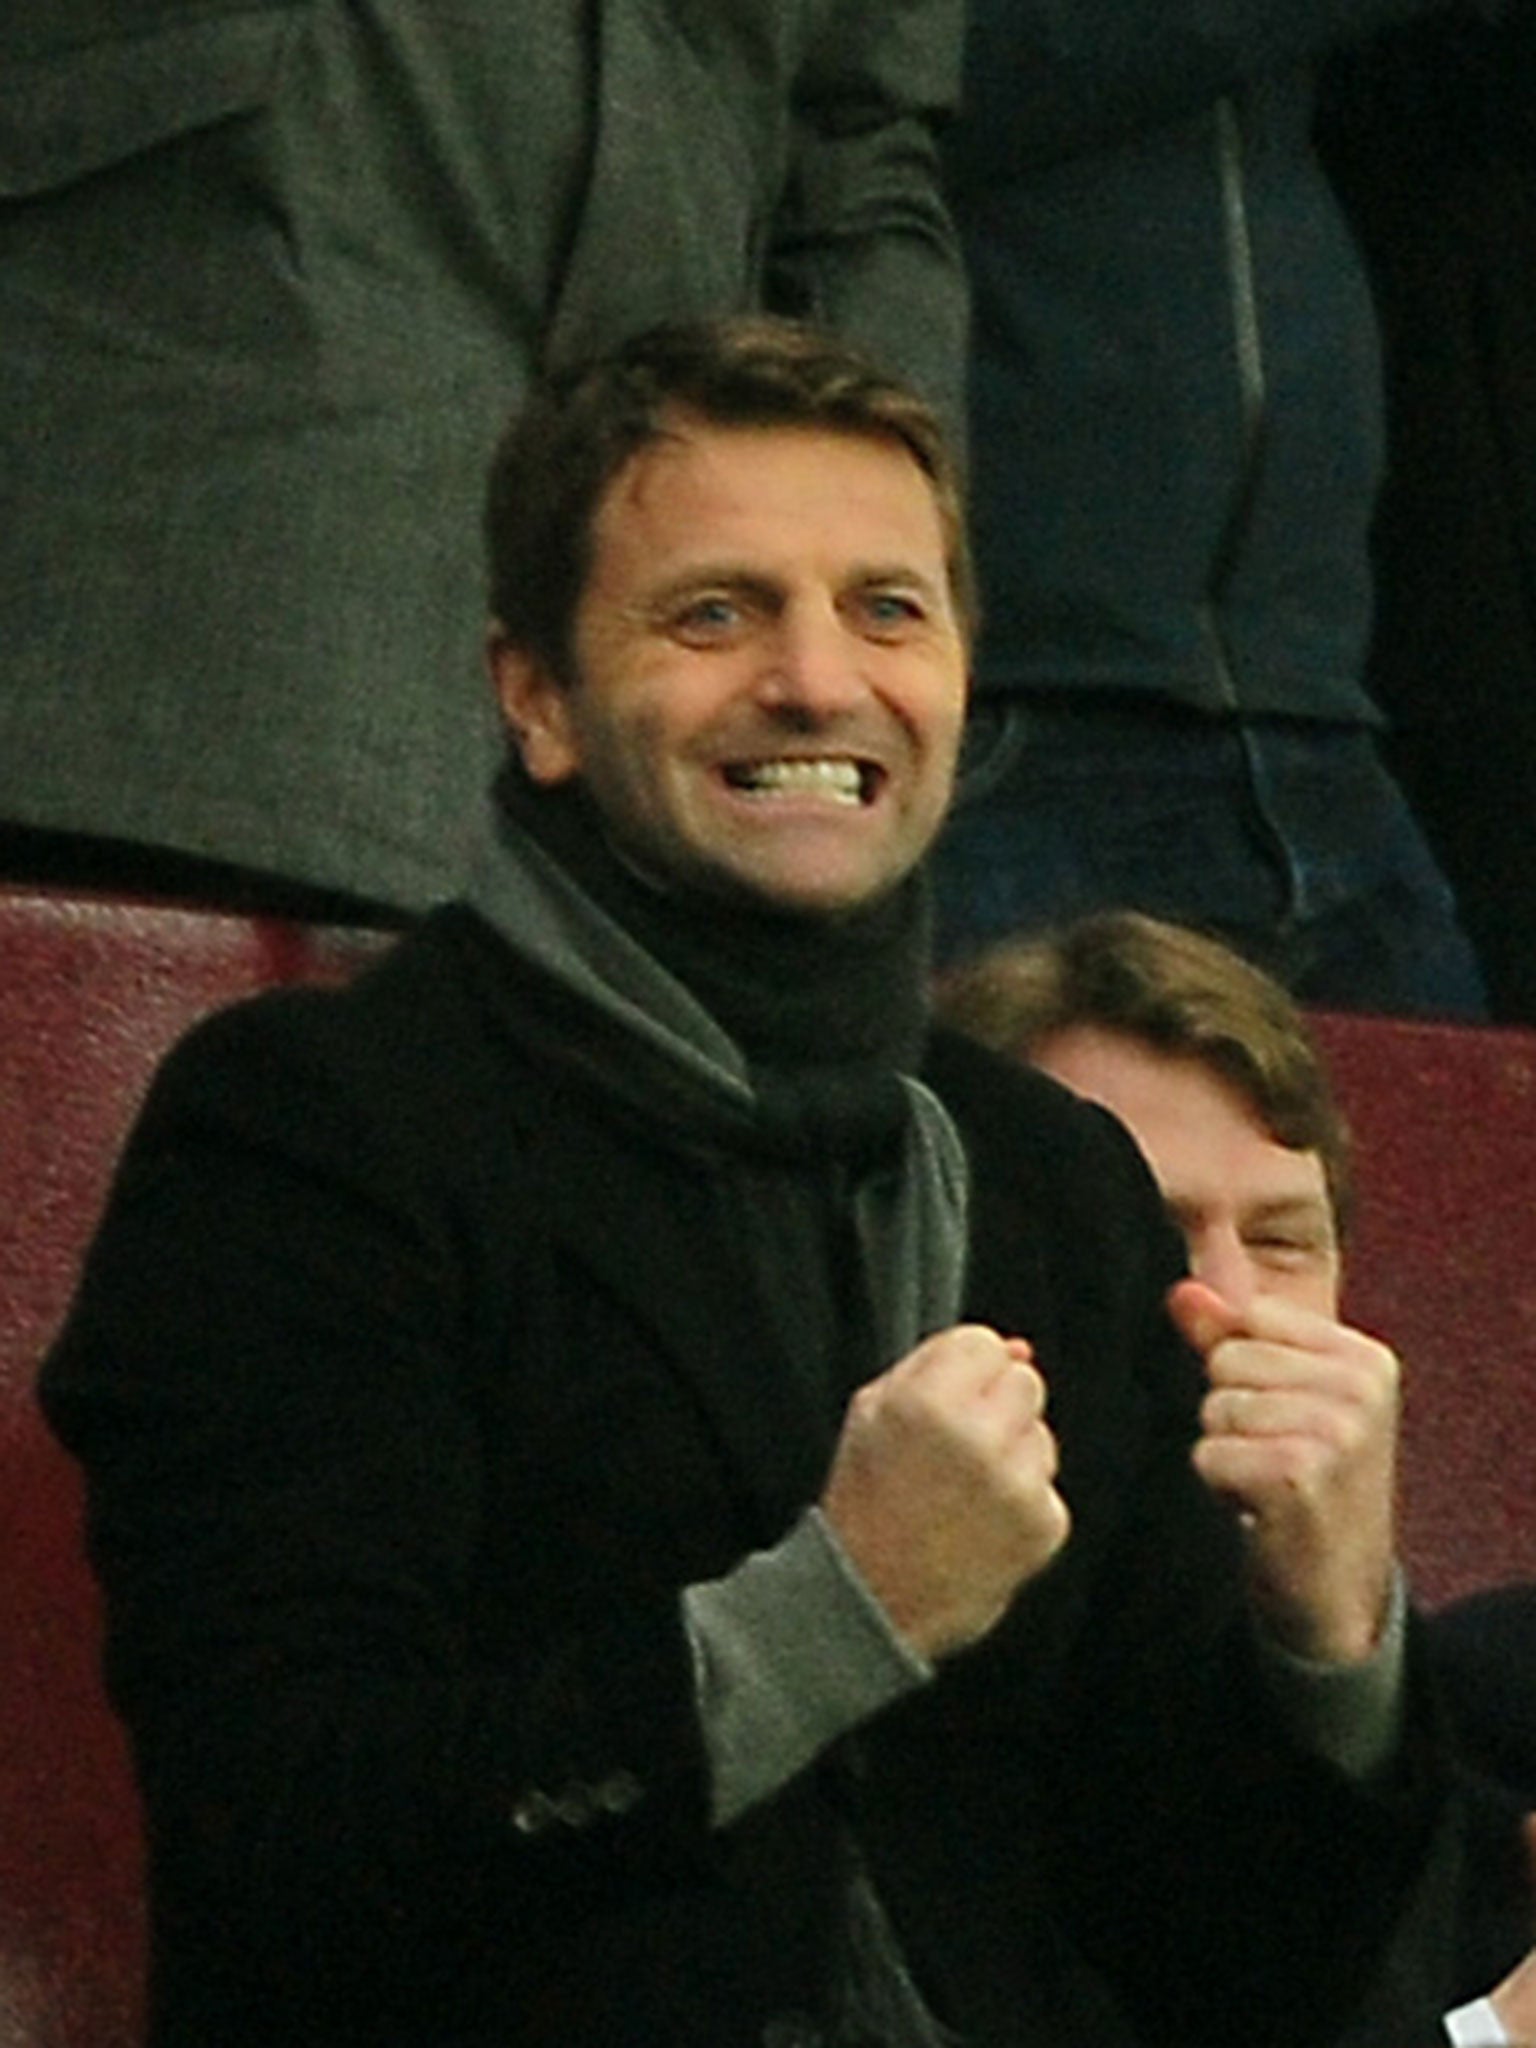 Tim Sherwood celebrates one of Villa’s goals from the stands